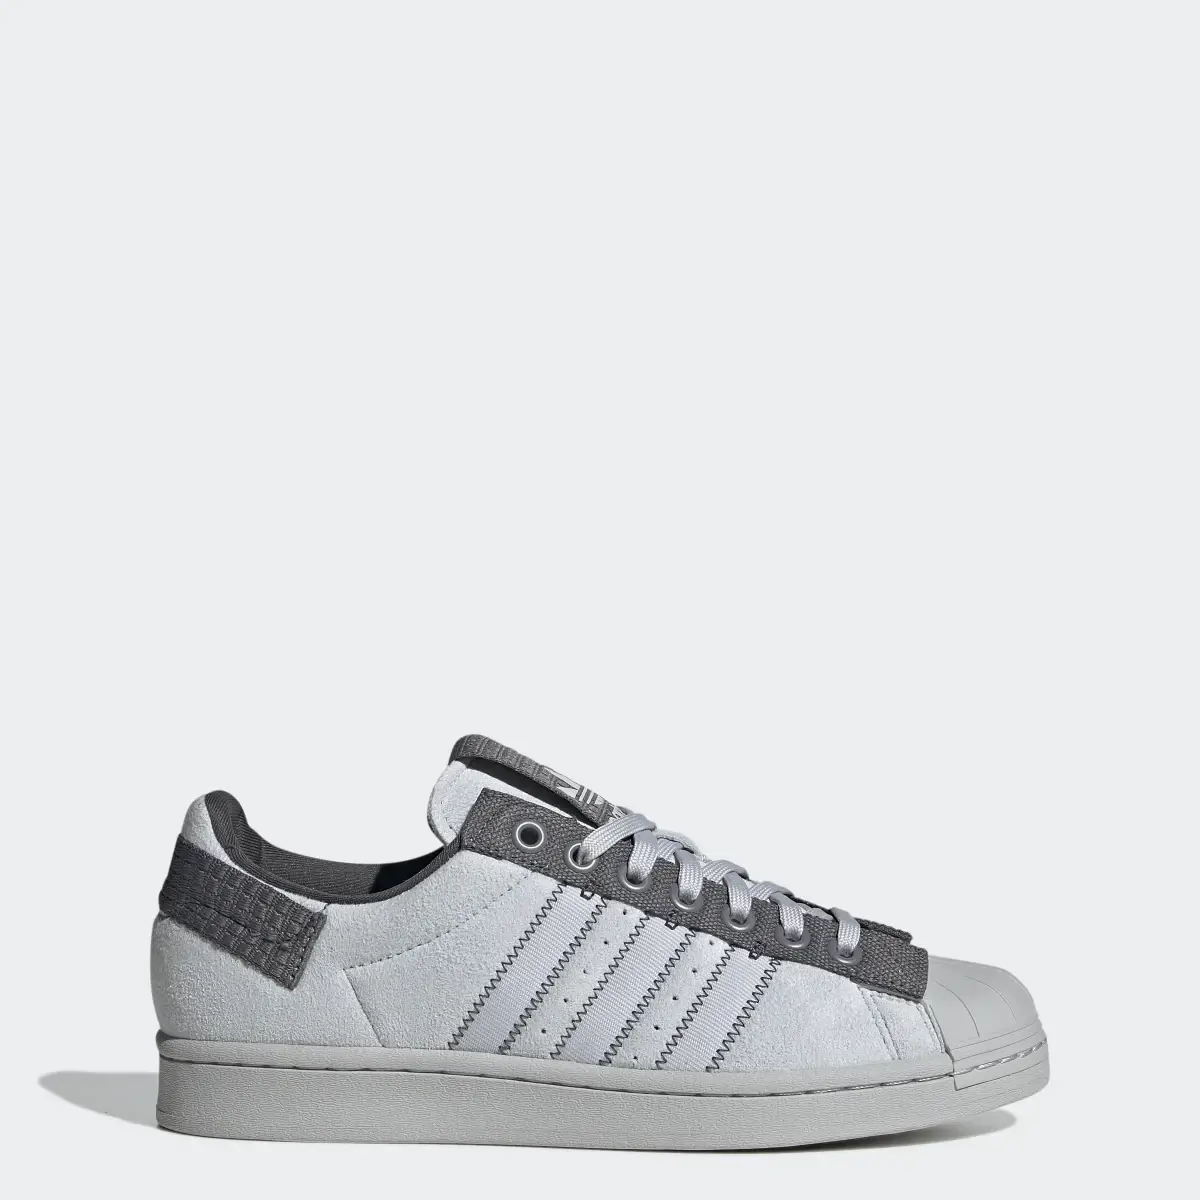 Adidas Superstar Parley Shoes. 1